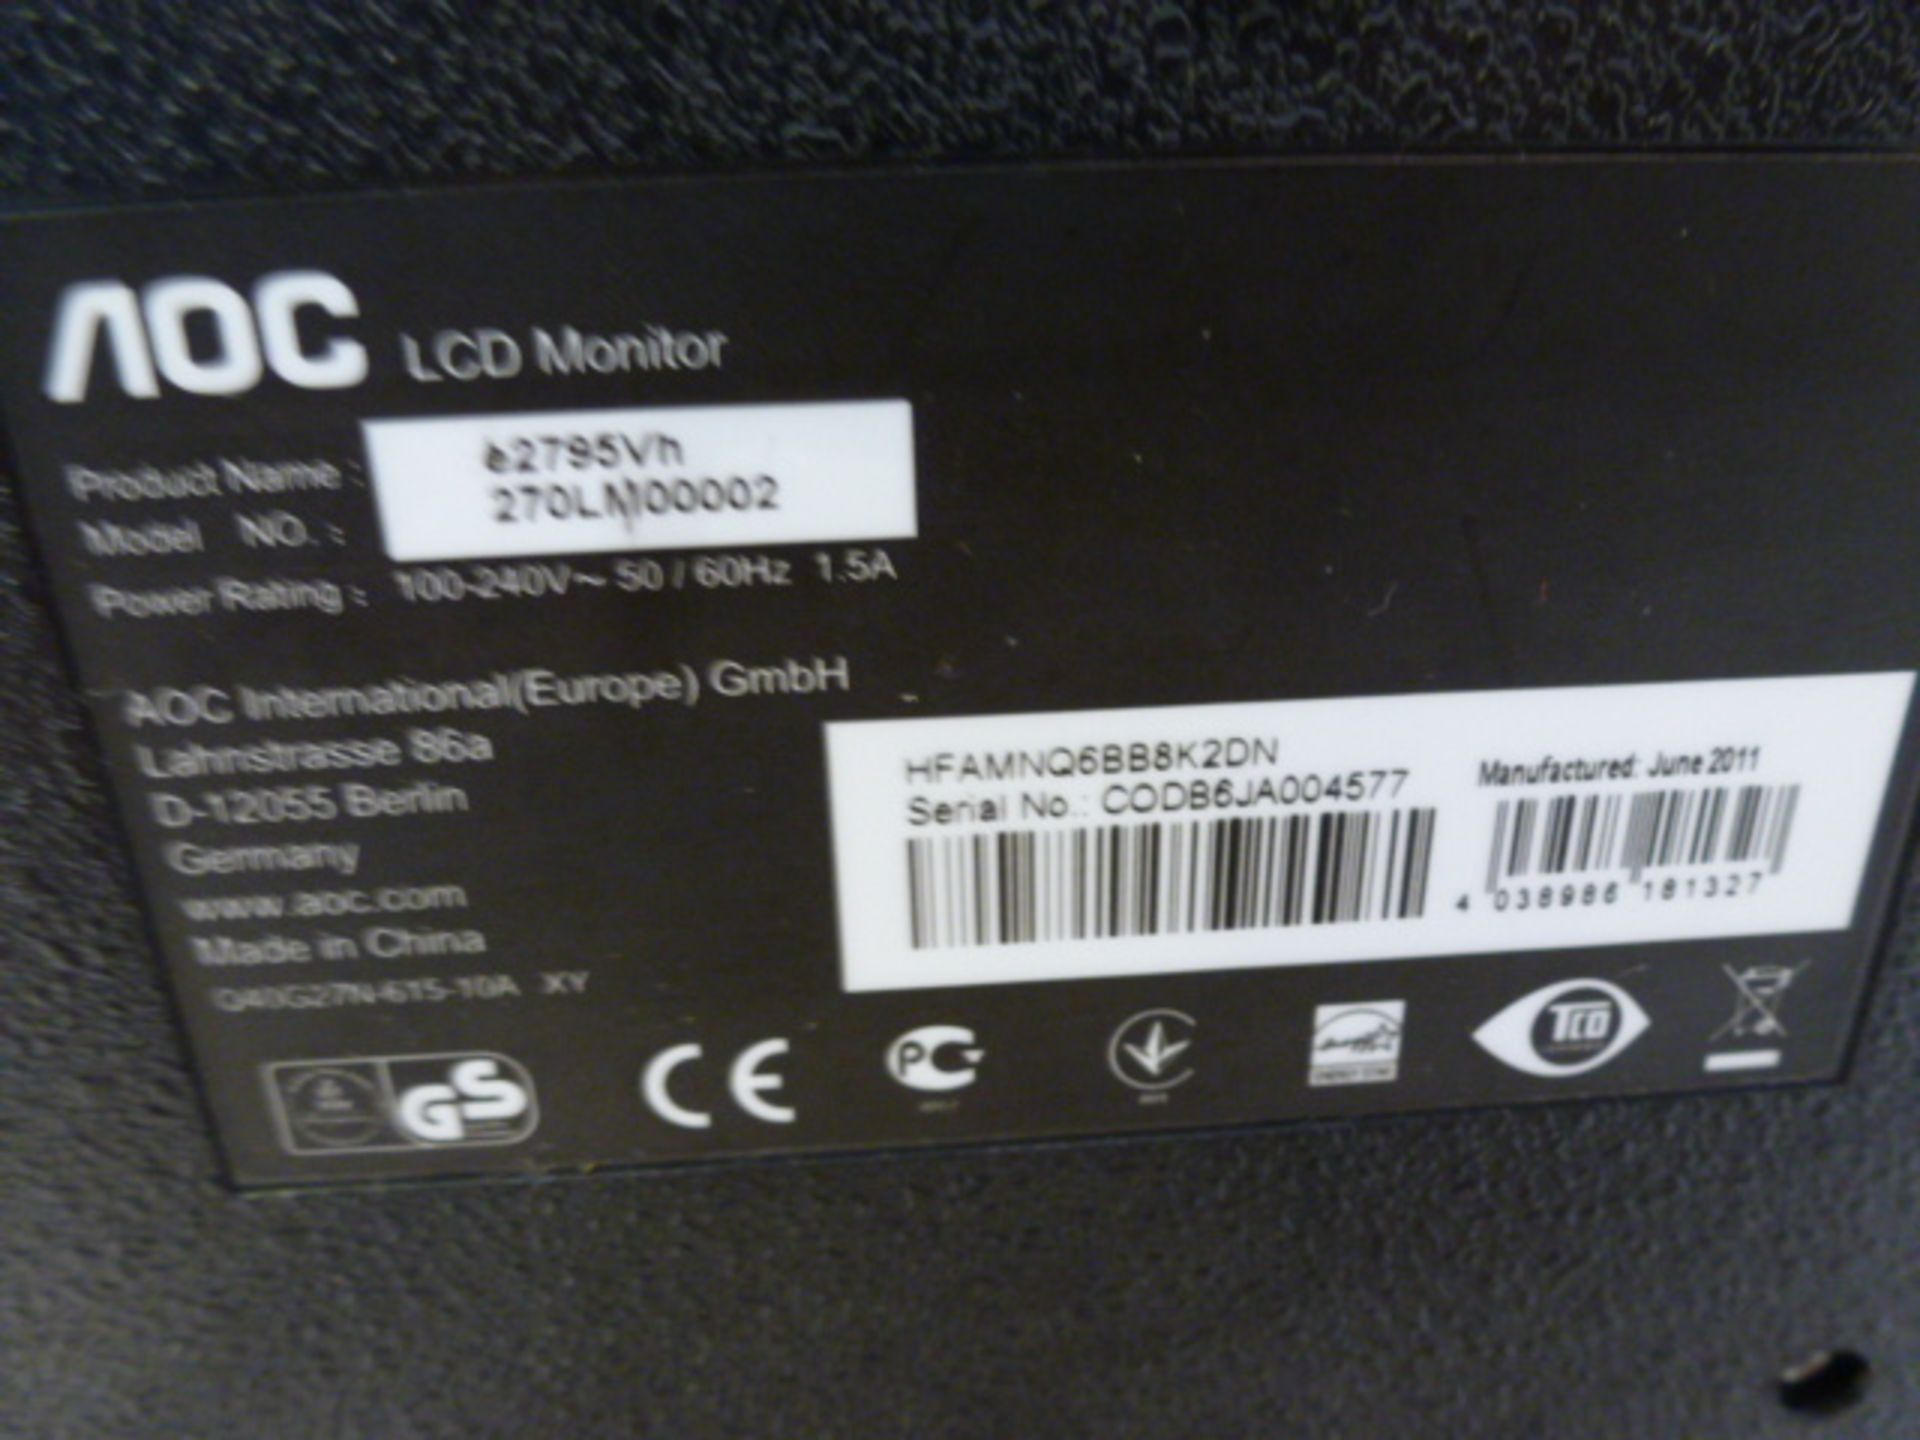 AOC 27" LCD Monitor, Model E2795VH. Comes with Power Supply & VGA Cable - Image 3 of 5